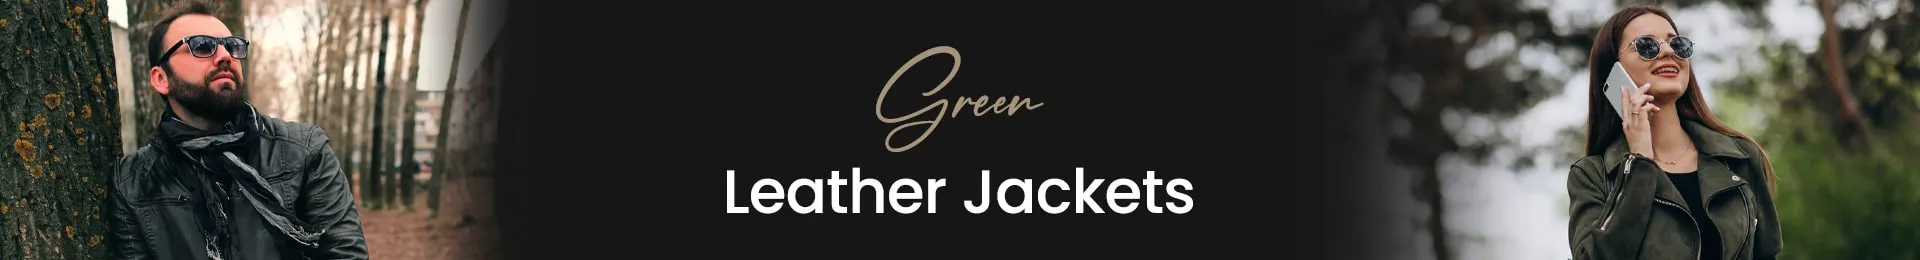 Shop Green Leather Jackets by SCIN